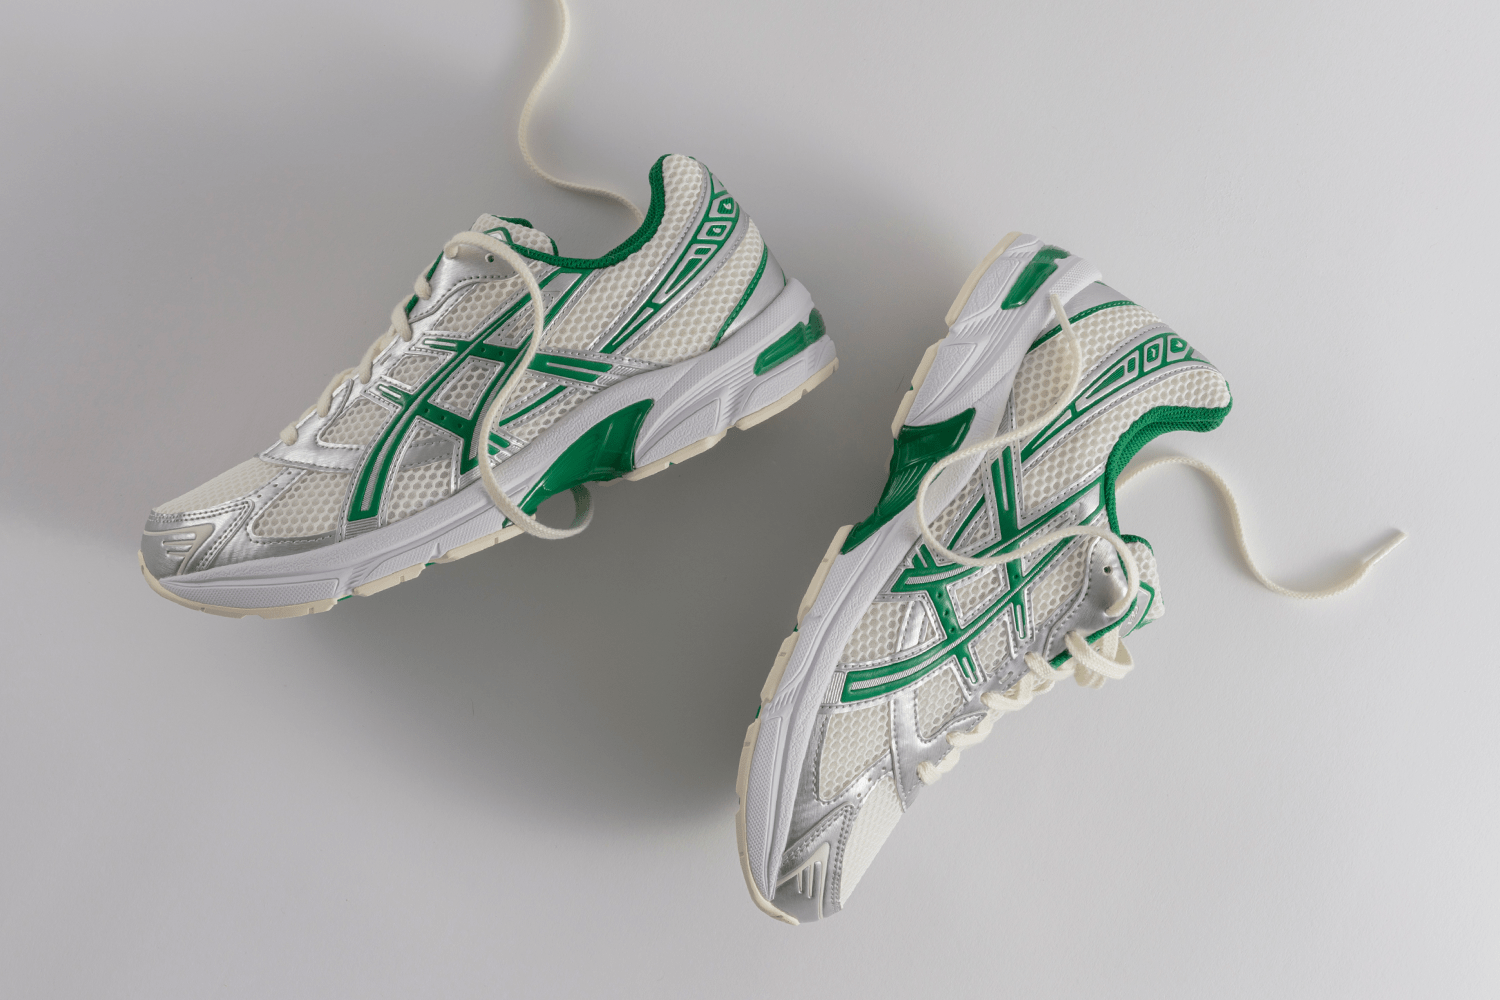 The ASICS GEL-NYC and GEL-1130 get a new look in 'Kale Green'